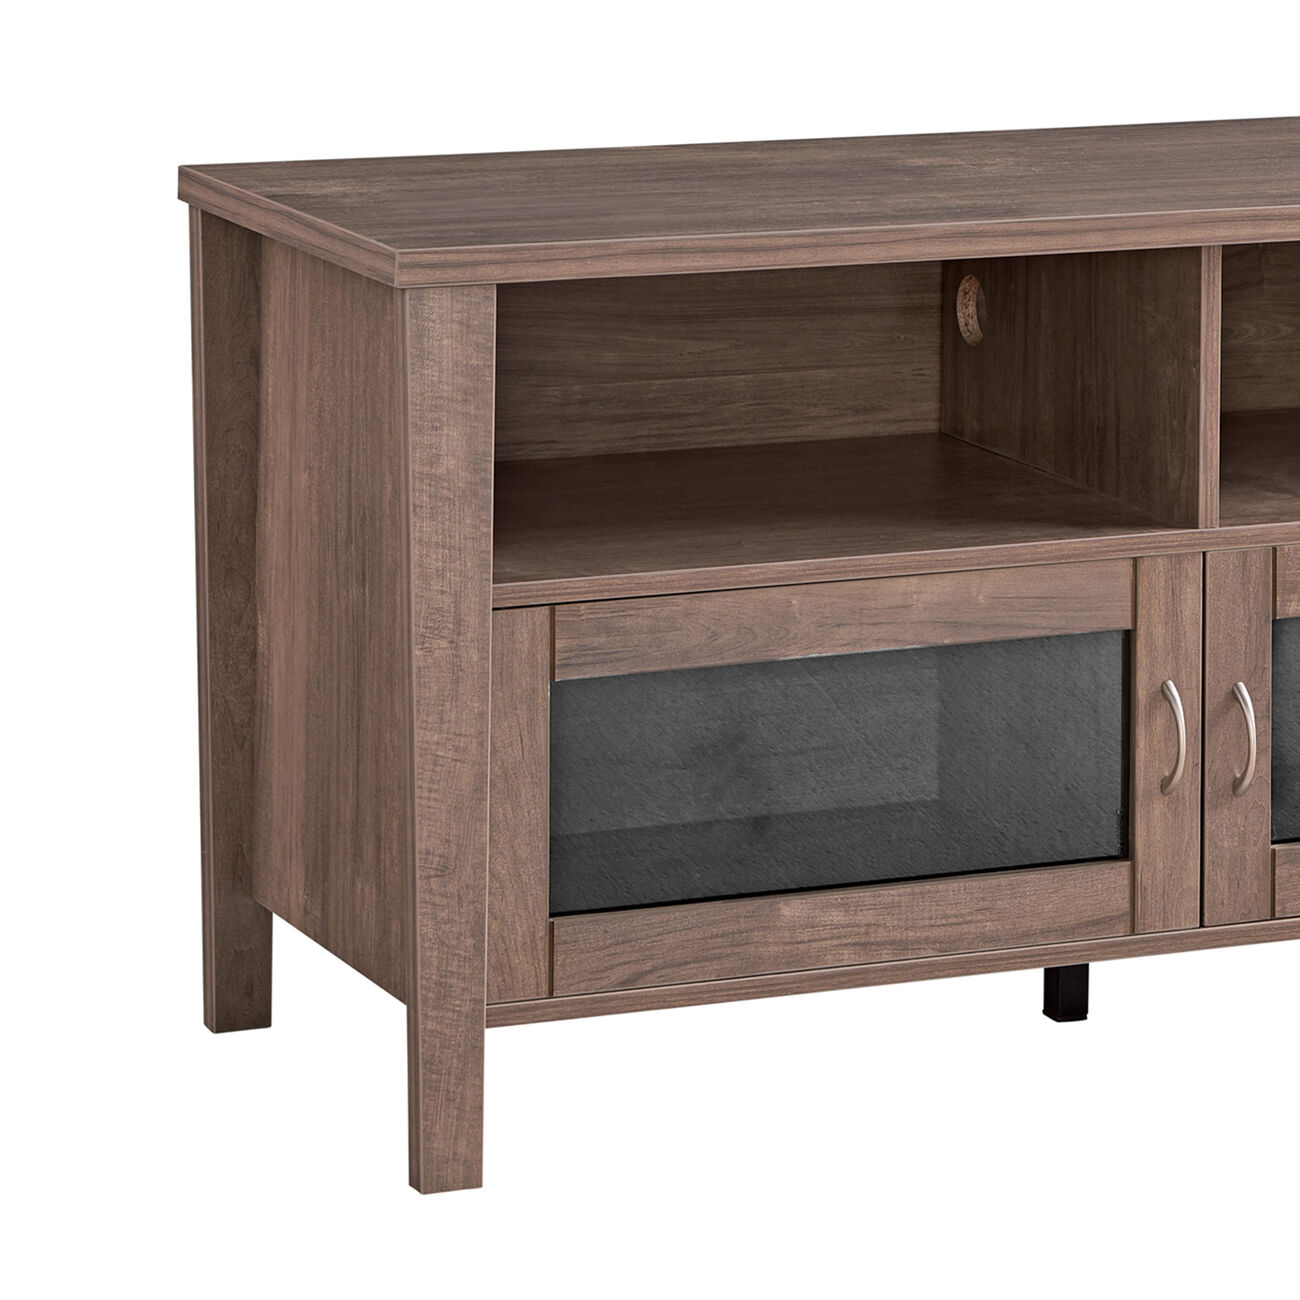 Wooden TV Stand with 2 Open Shelves and 2 Door Cabinets, Walnut Oak